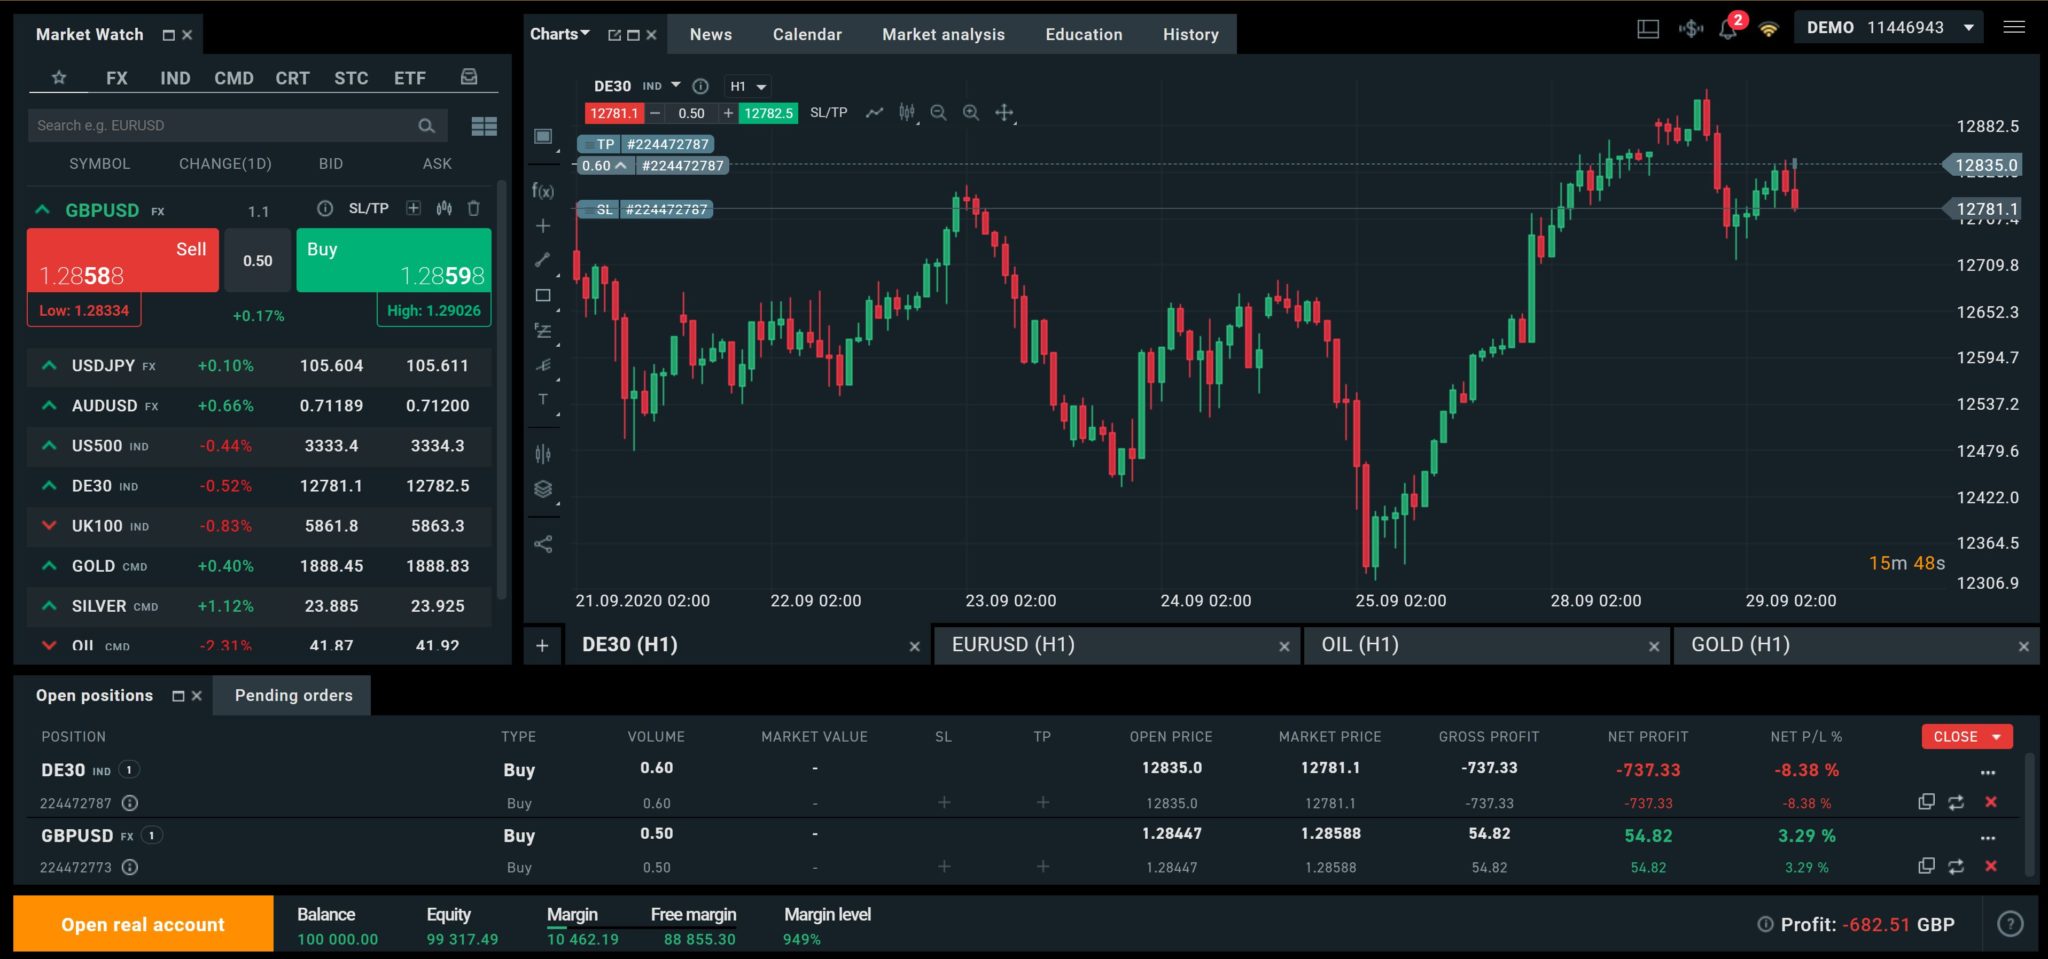 XTB Trading Review 2020 - Fees, Pros & Cons Revealed